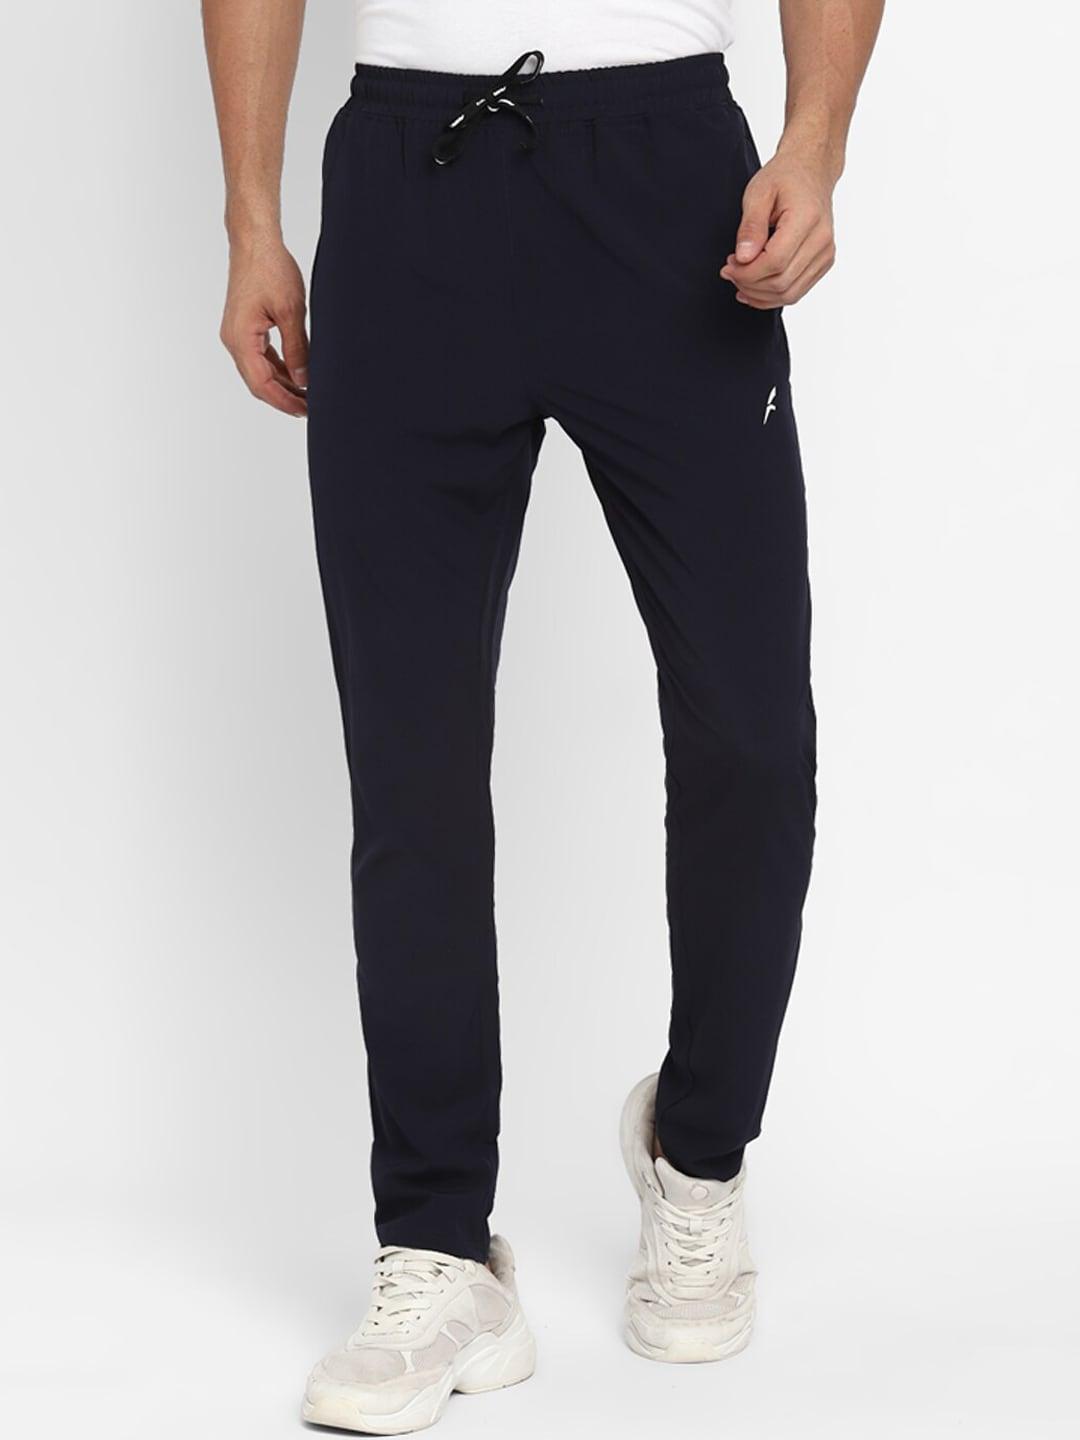 furo-by-red-chief-men-navy-blue-solid-track-pants